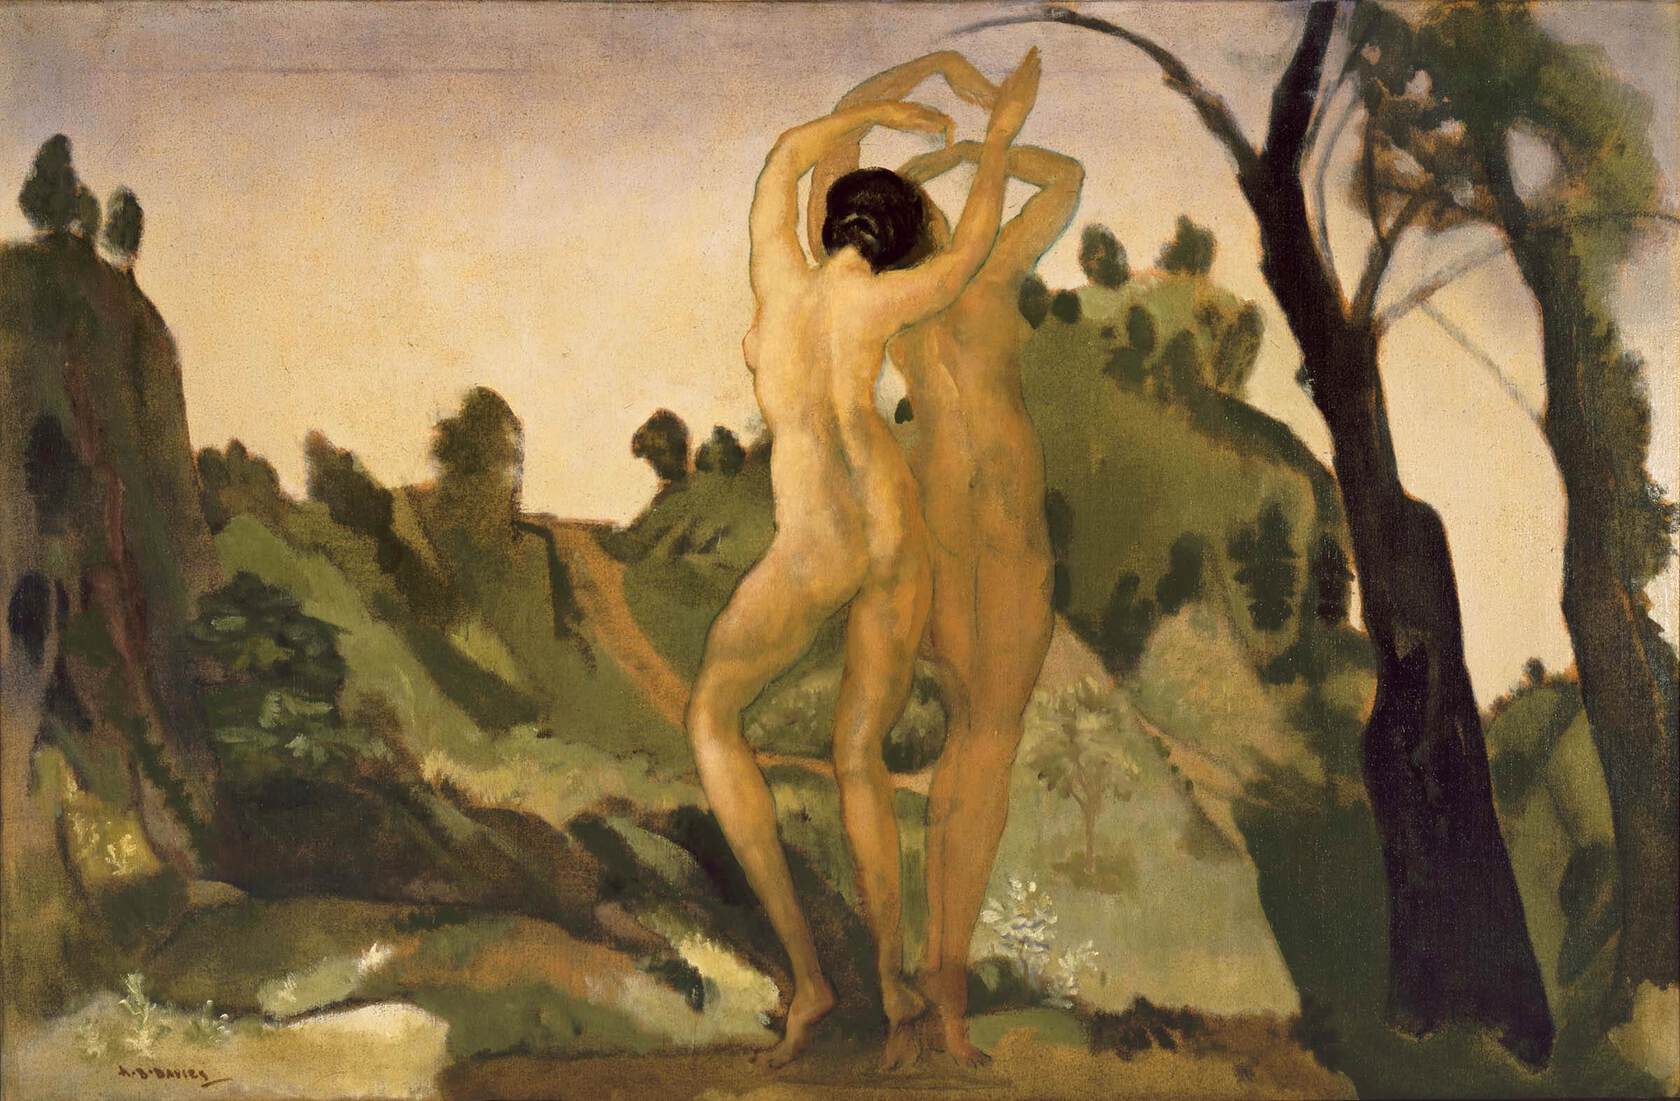 An abstract painting of two nude people dancing in a garden